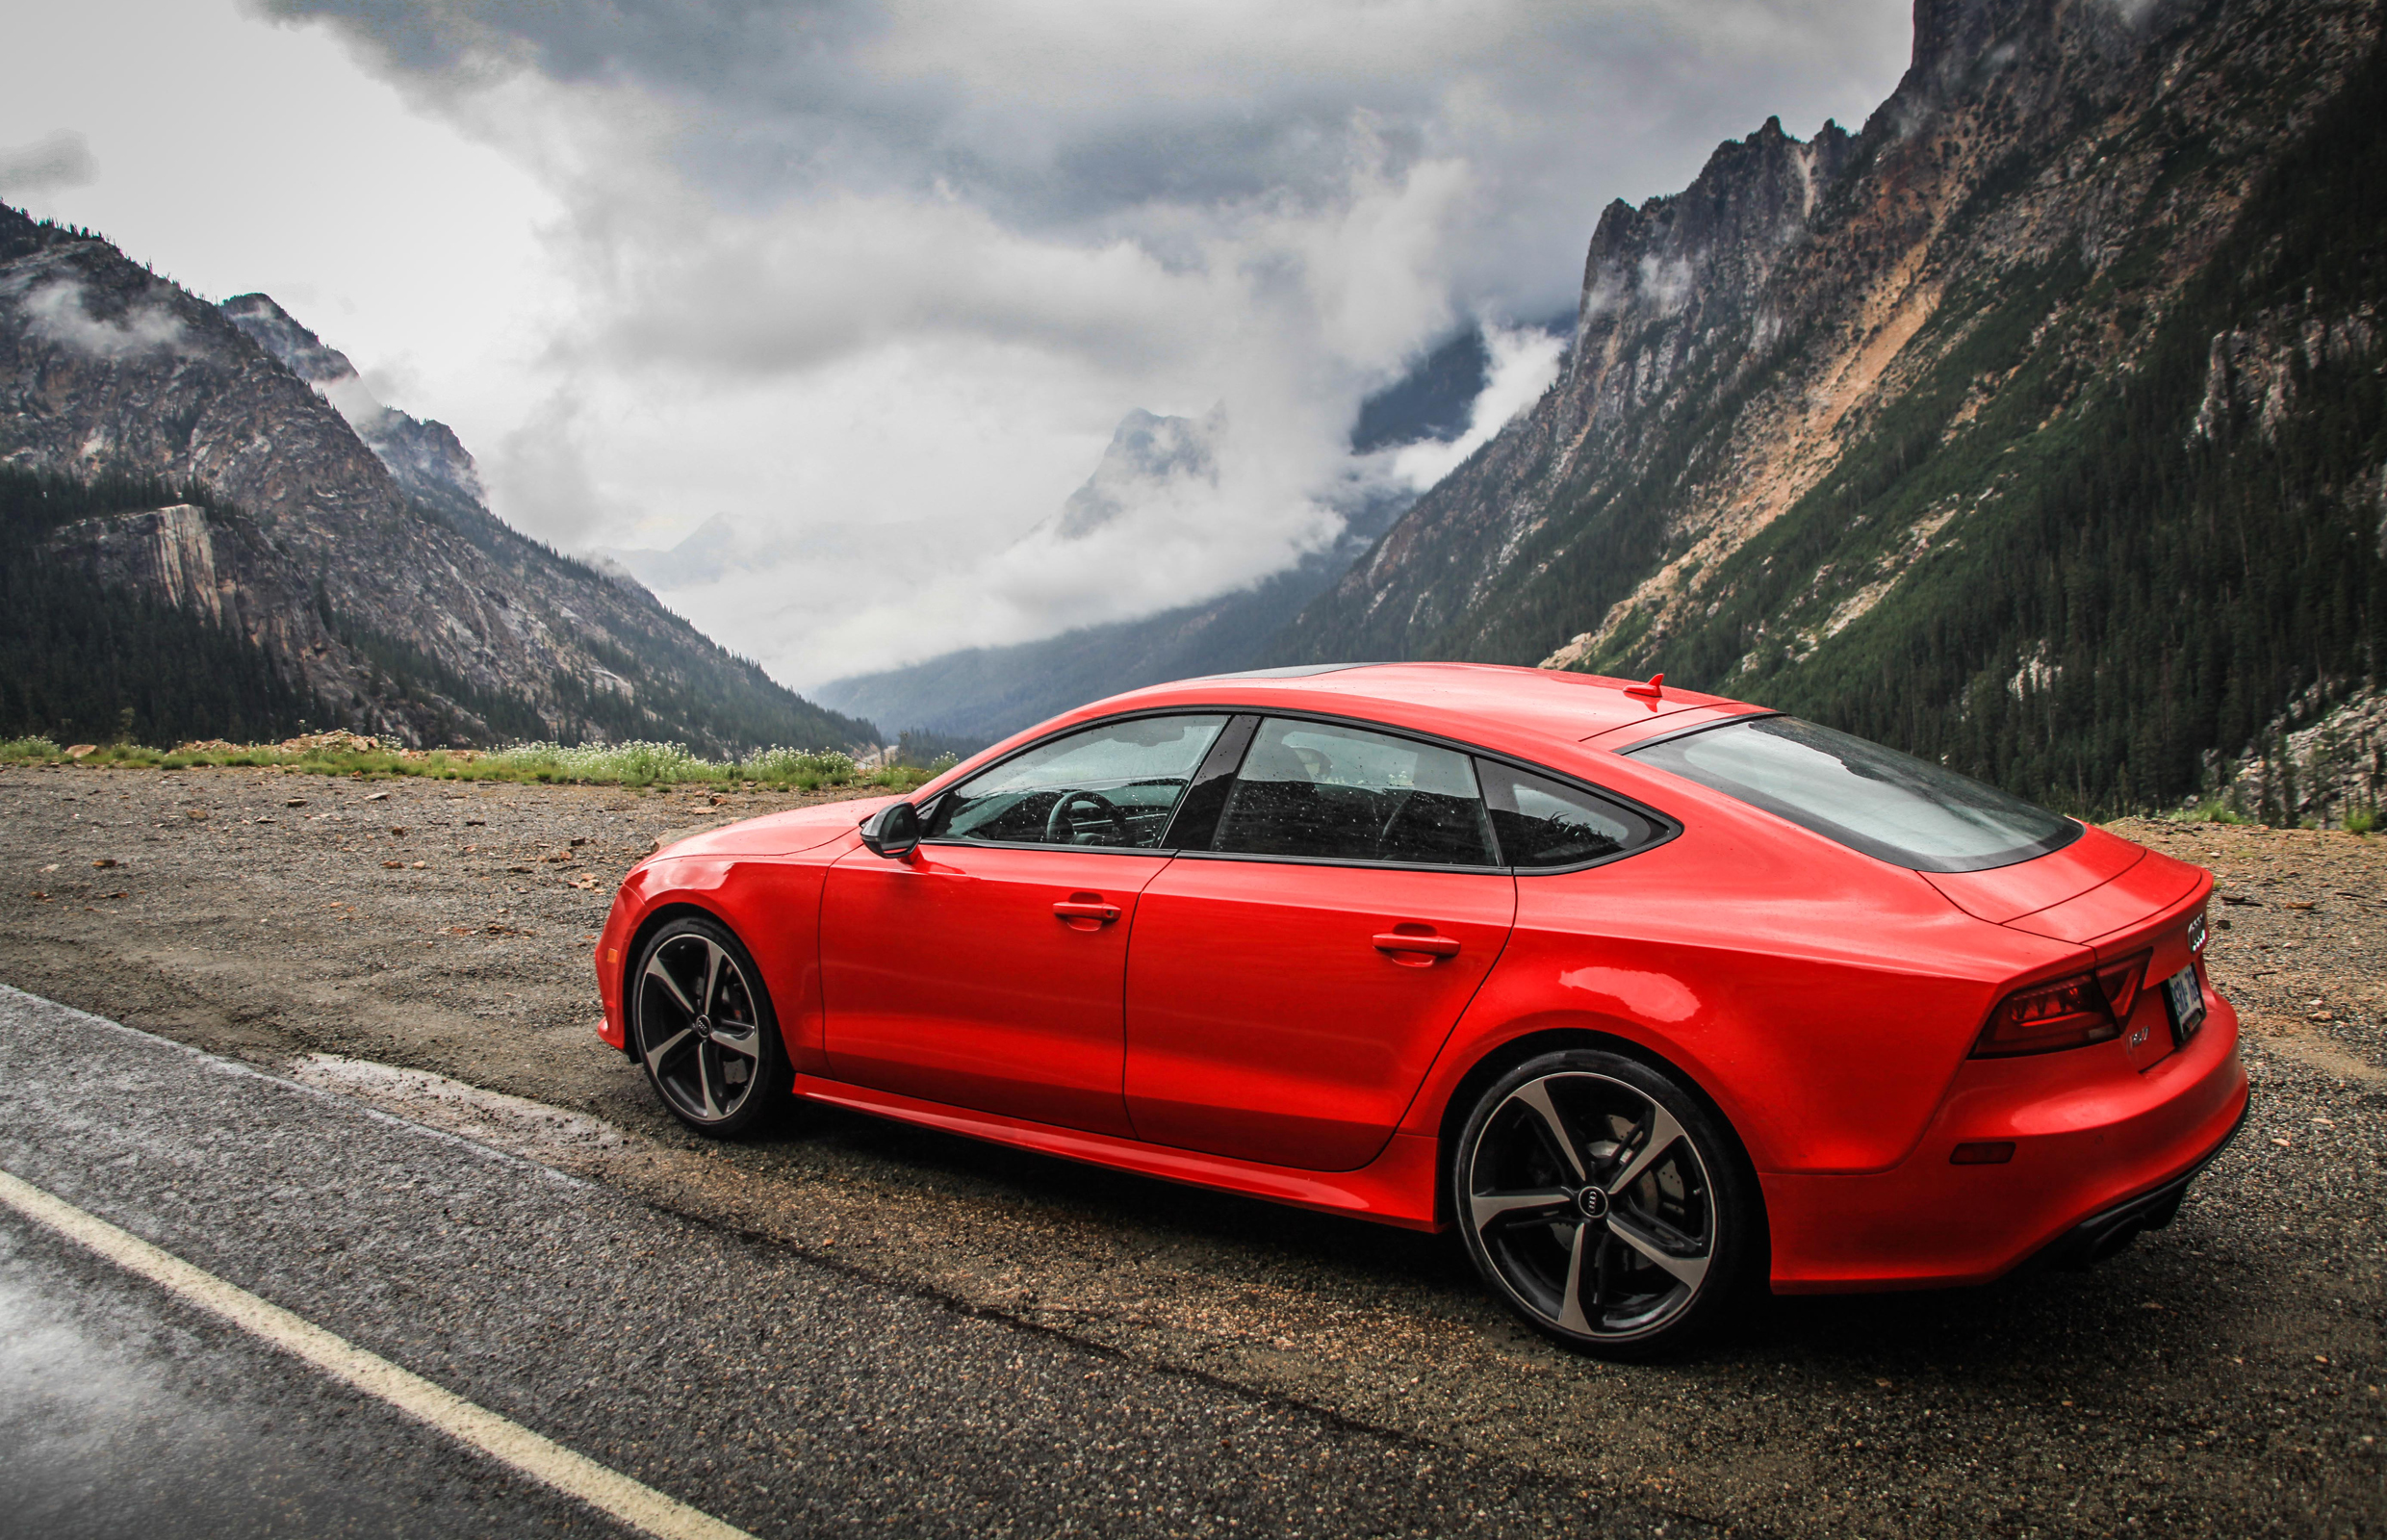 cars, mountains, audi, red, side view, rs7